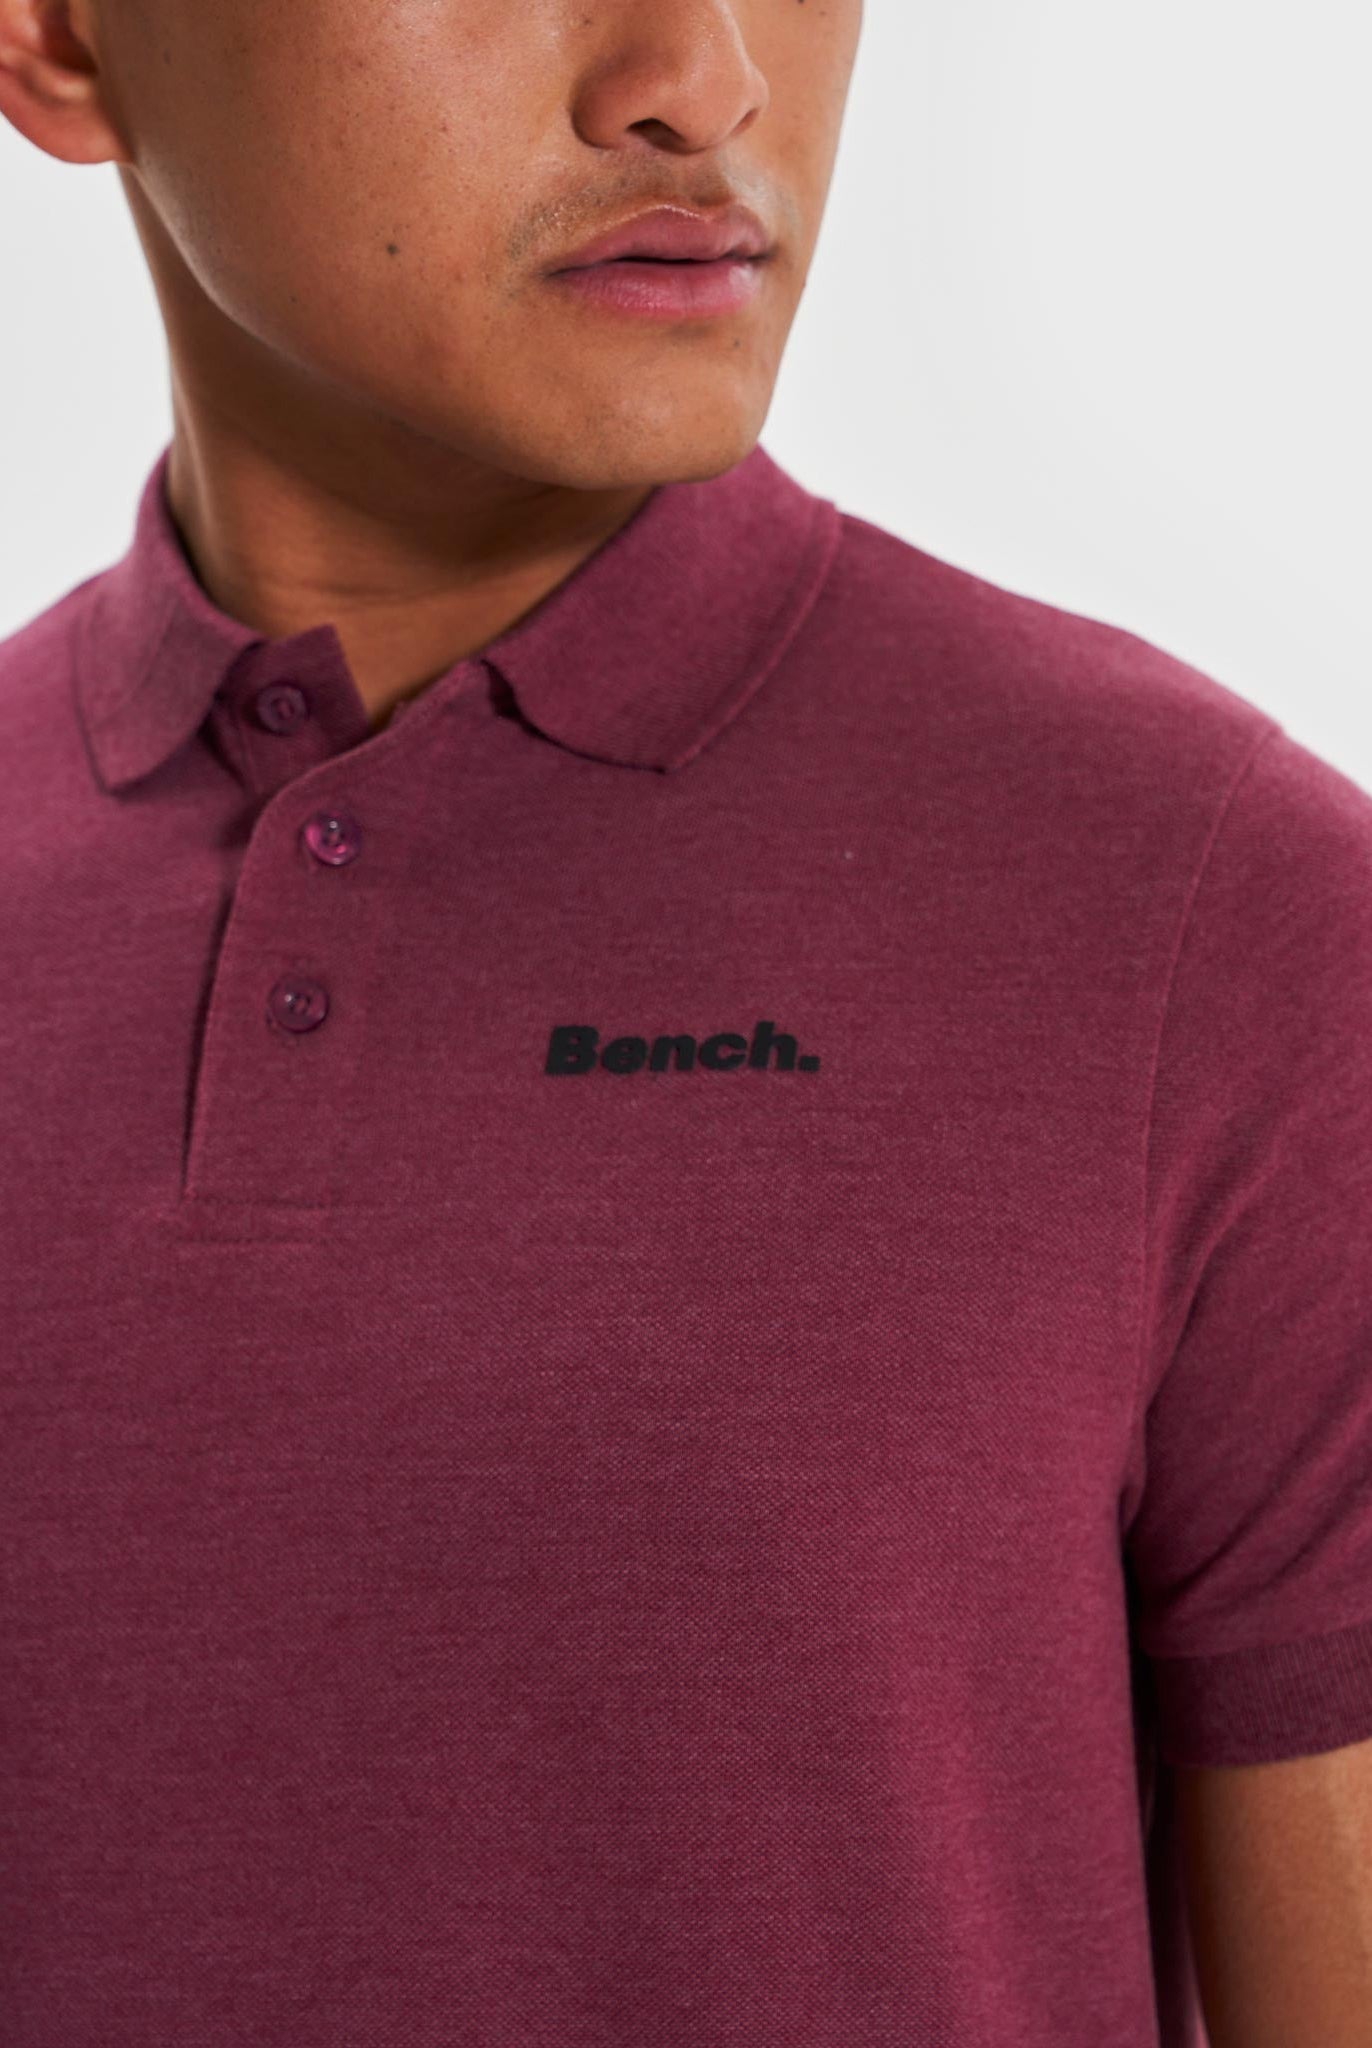 Mens 'BLANKA' 3 Pack Polos - ASSORTED - Shop at www.Bench.co.uk #LoveMyHood